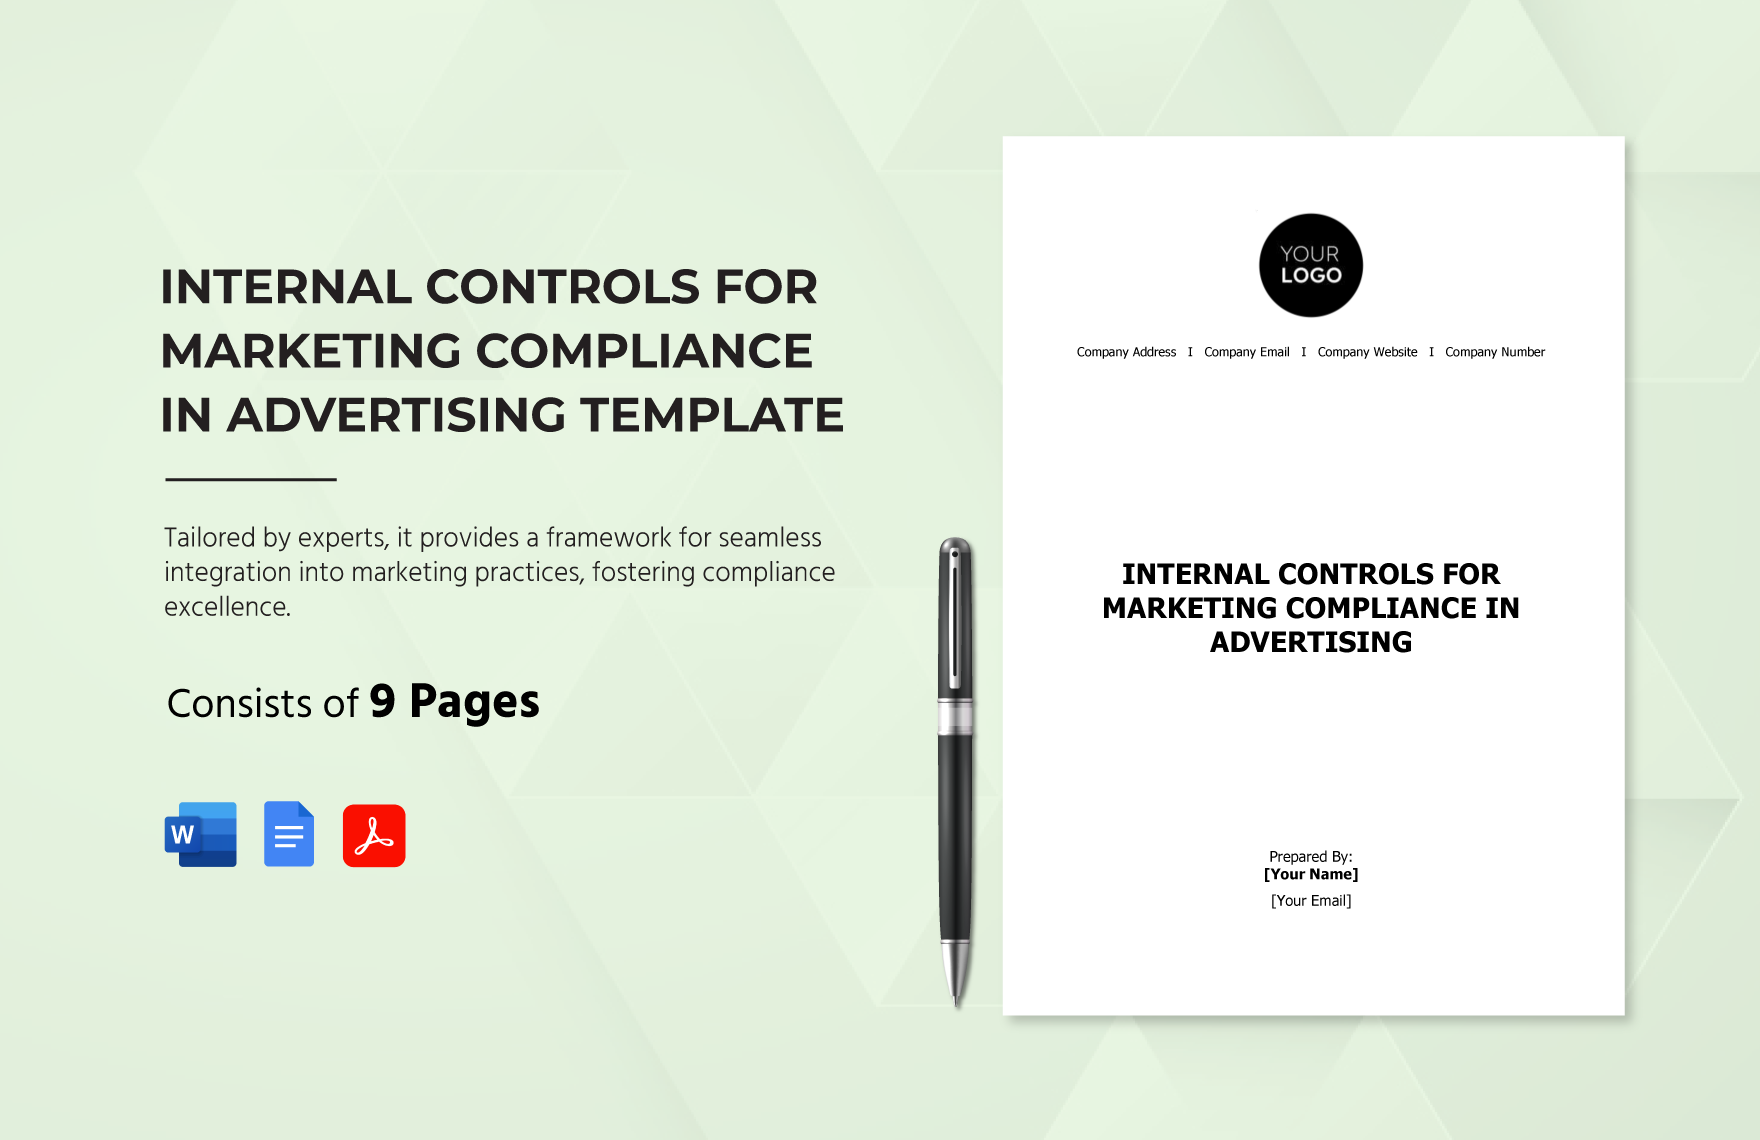 Internal Controls for Marketing Compliance in Advertising Template